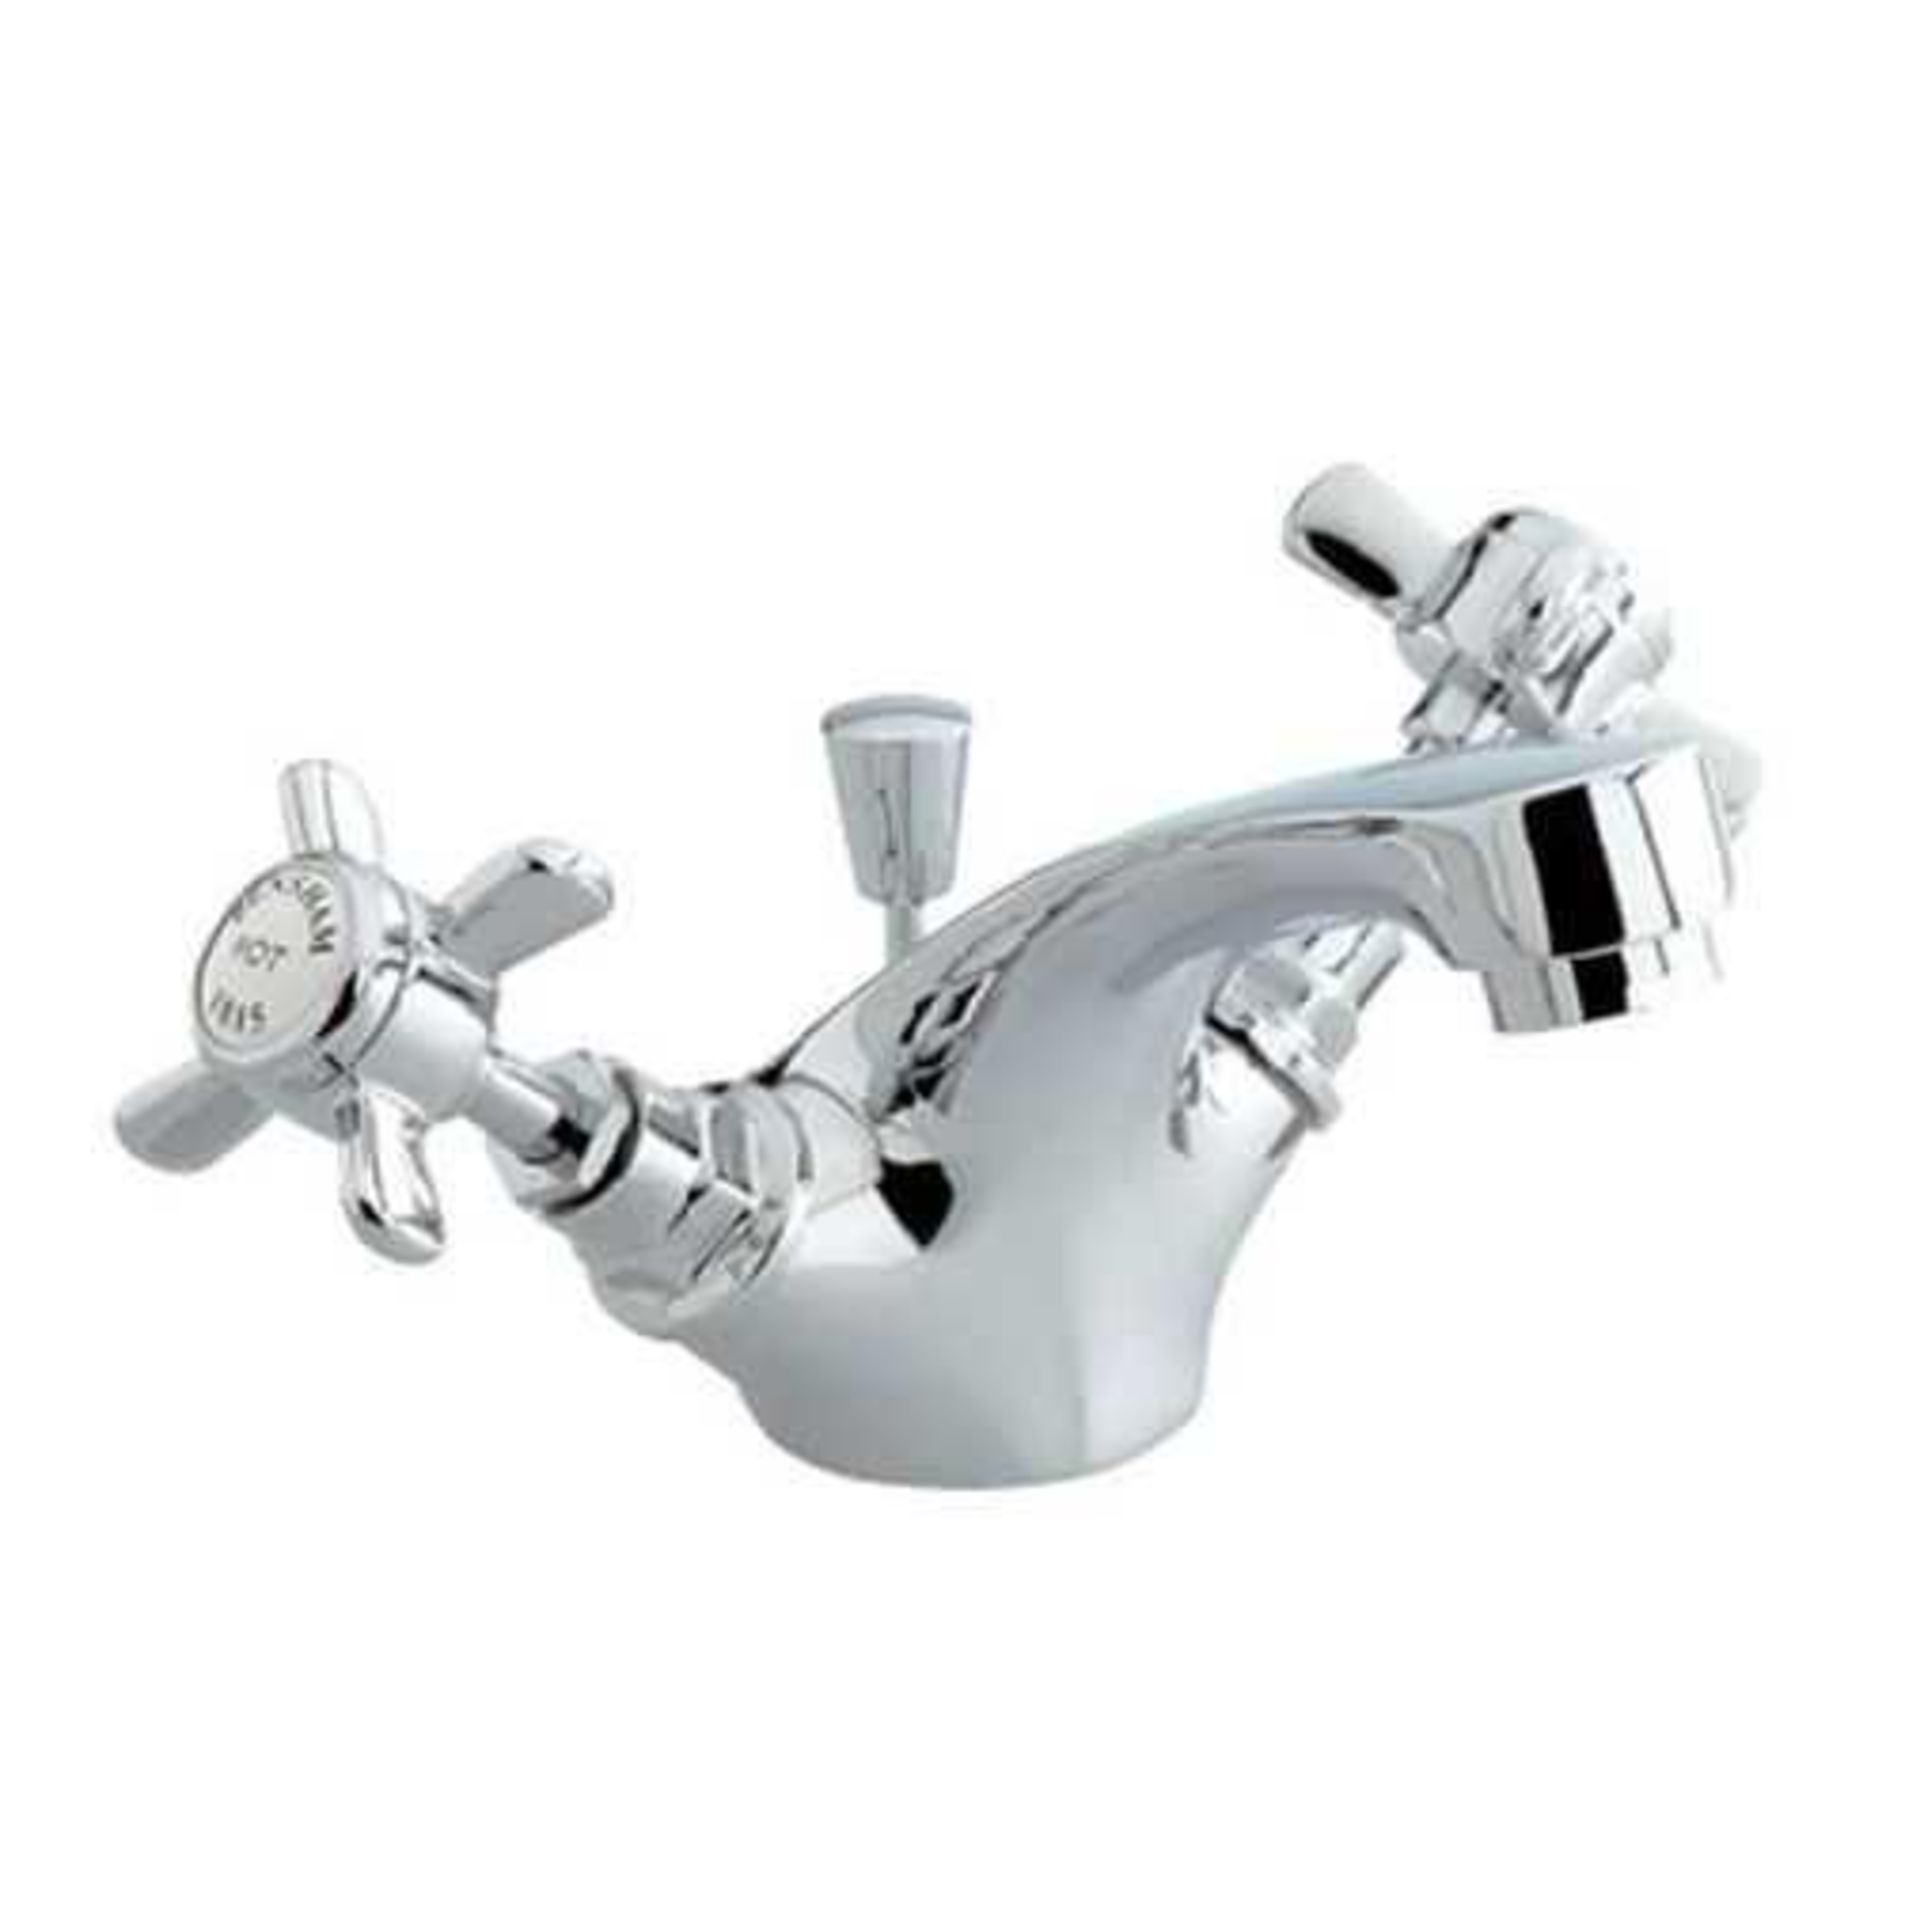 Rrp £200 Boxed Brand New Bath Store Bensham Traditional Basin Mixer Taps With Pop Up Waste